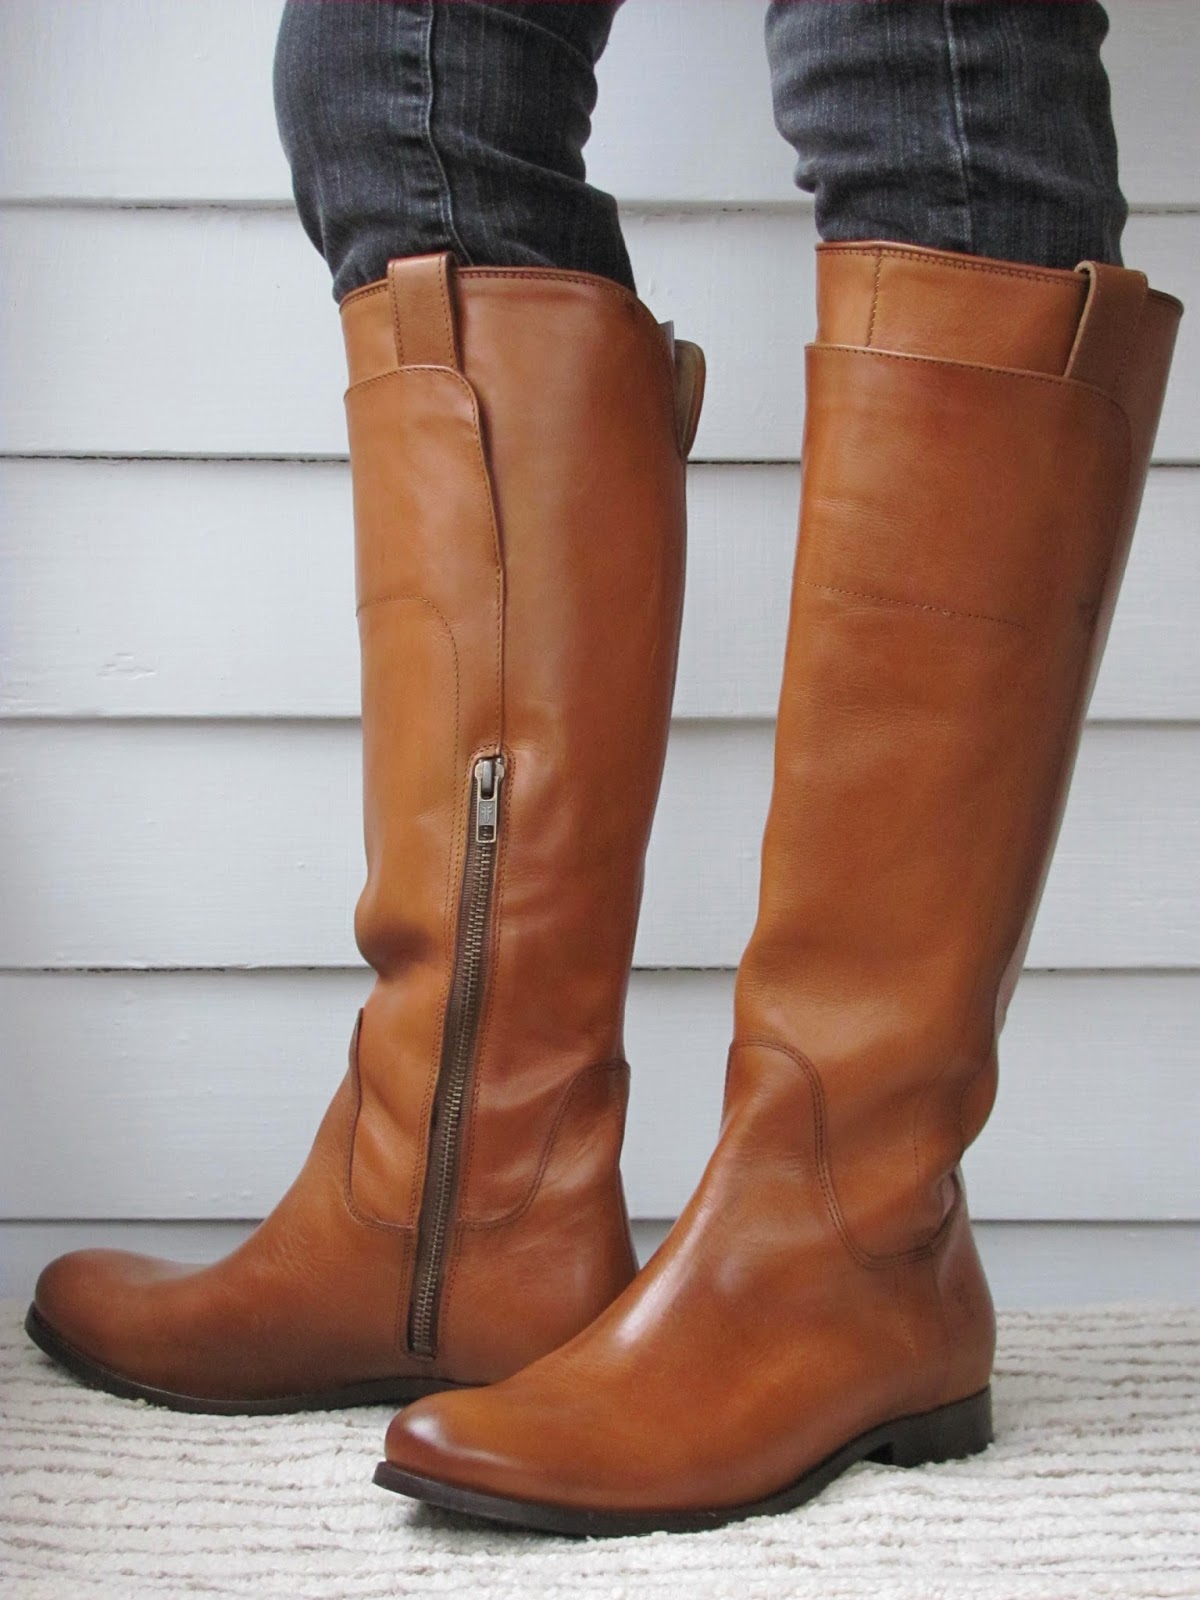 Howdy Slim! Riding Boots for Thin Calves: Frye Melissa Tall Riding